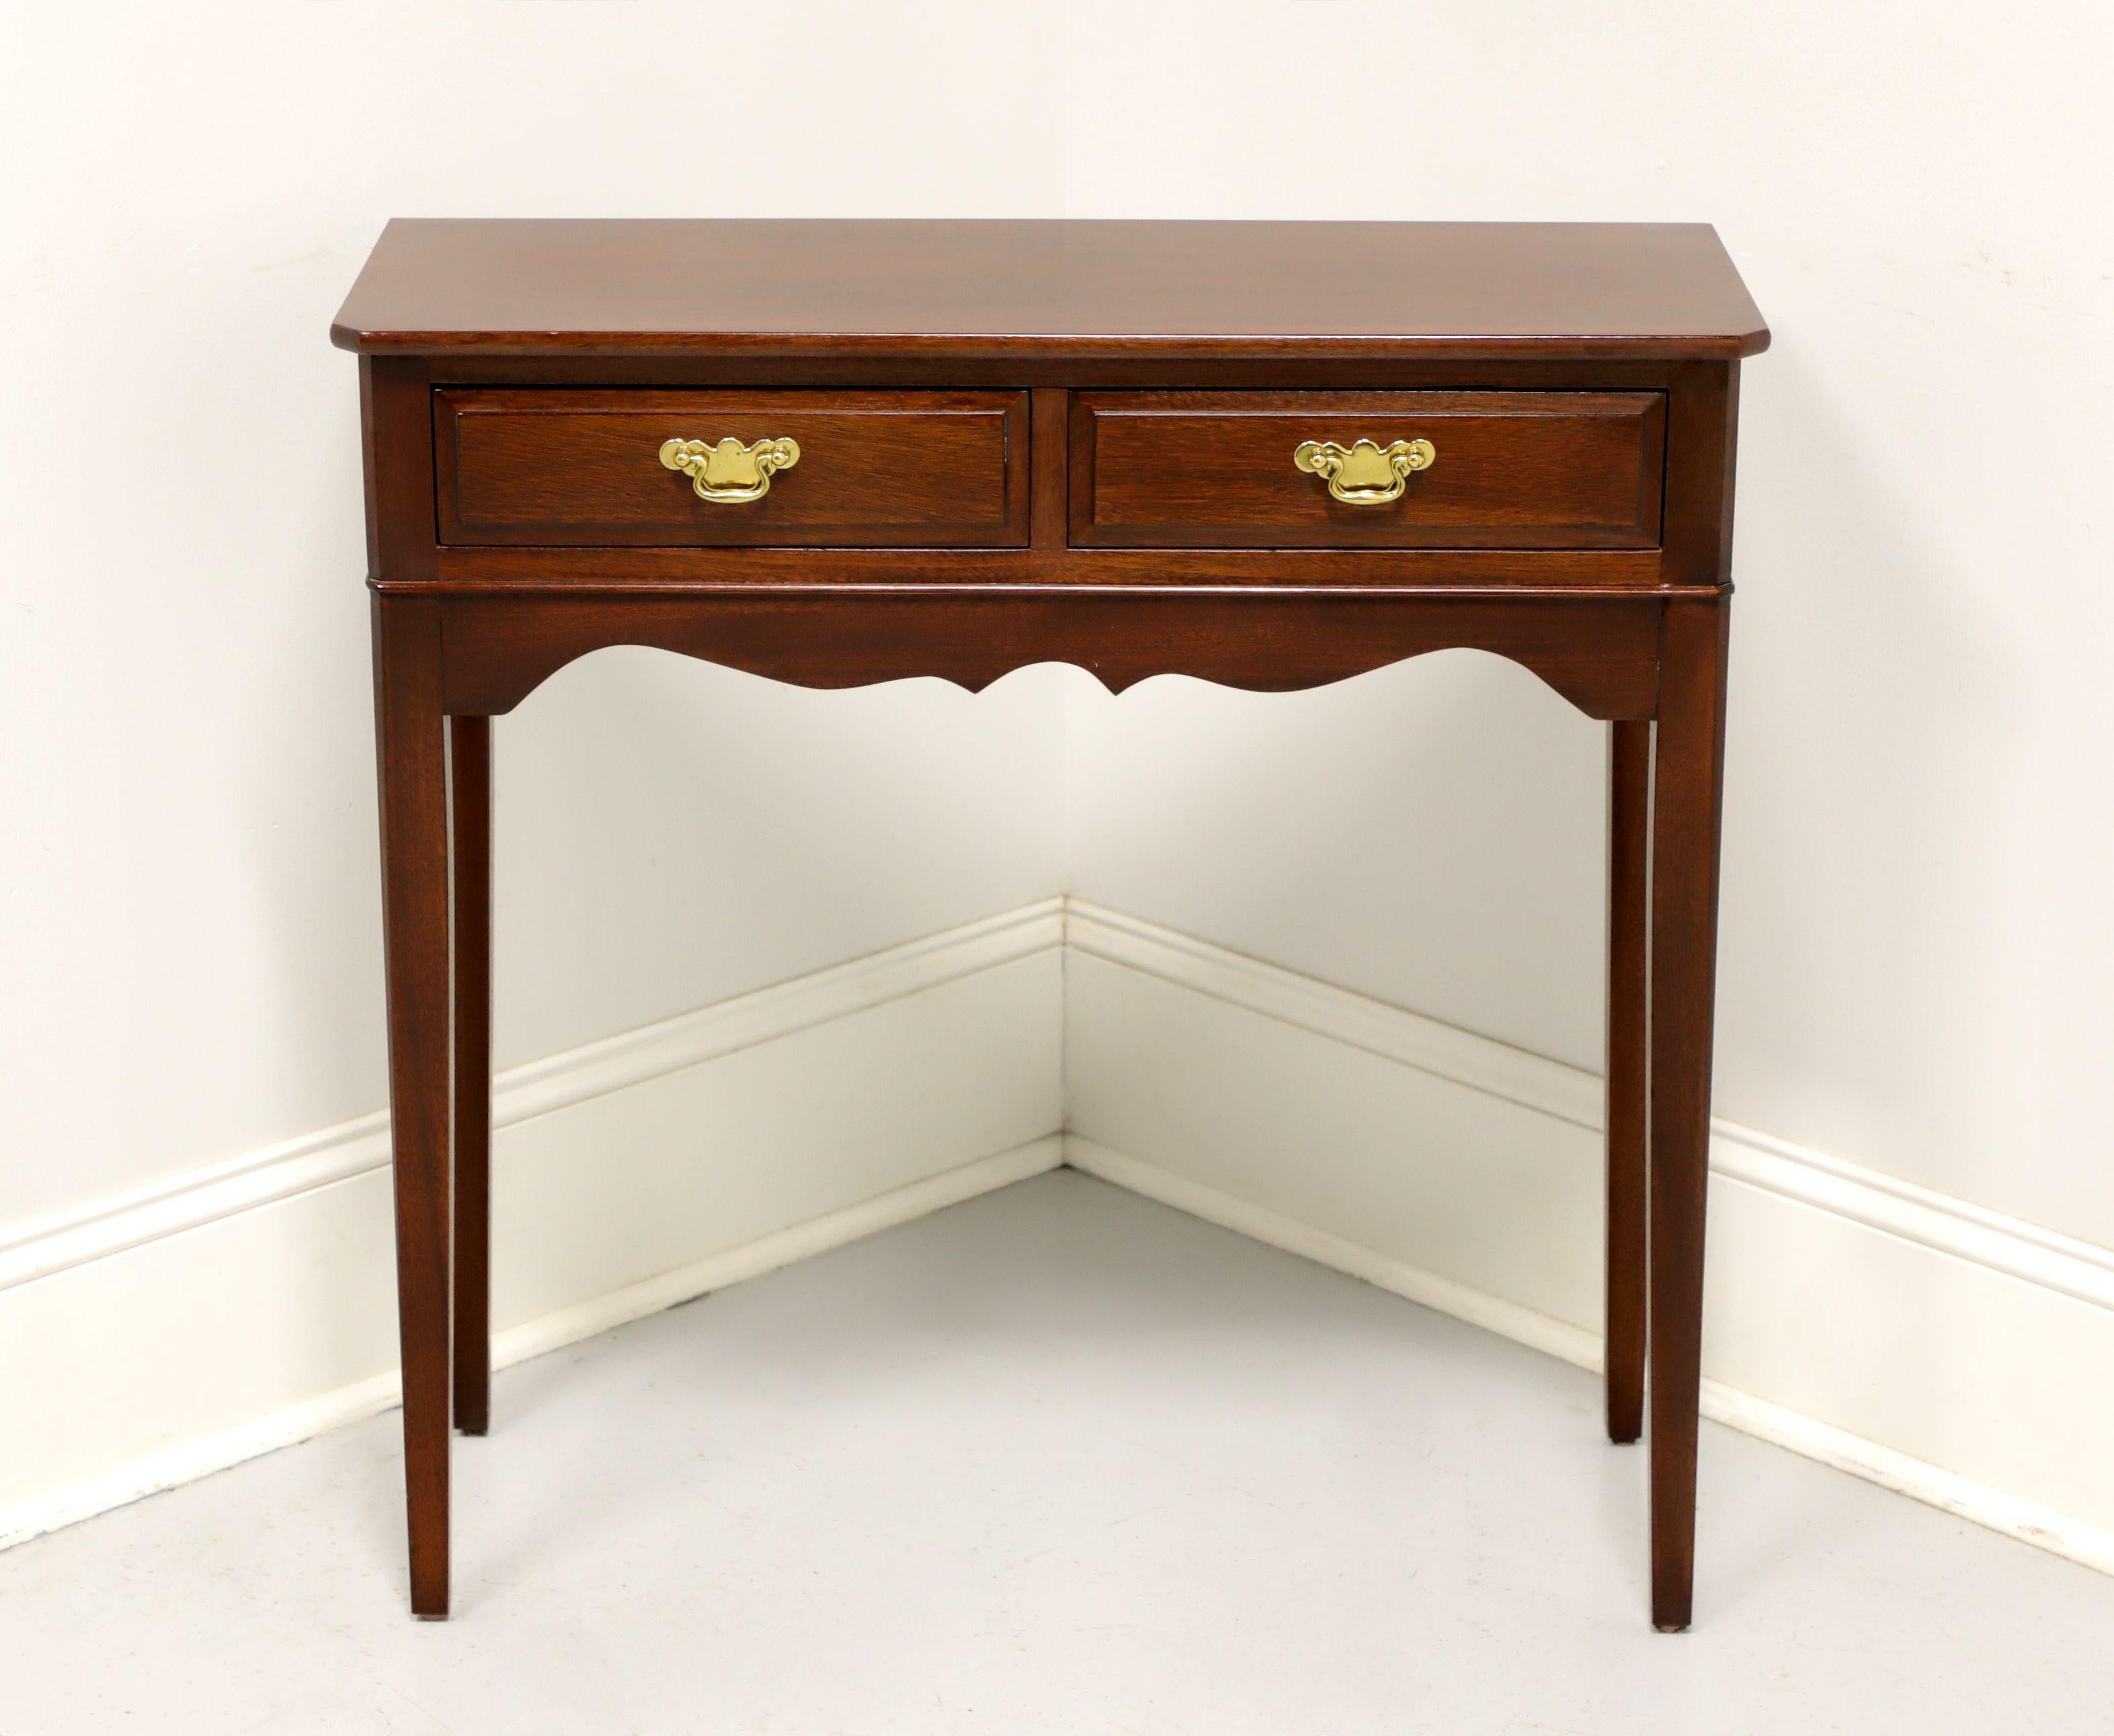 A Traditional style diminutive console table by Madison Square, of Hanover, Pennsylvania, USA. Mahogany with brass hardware, clipped corners, carved apron and tapered straight legs. Features two drawers of dovetail construction. Perfect size for